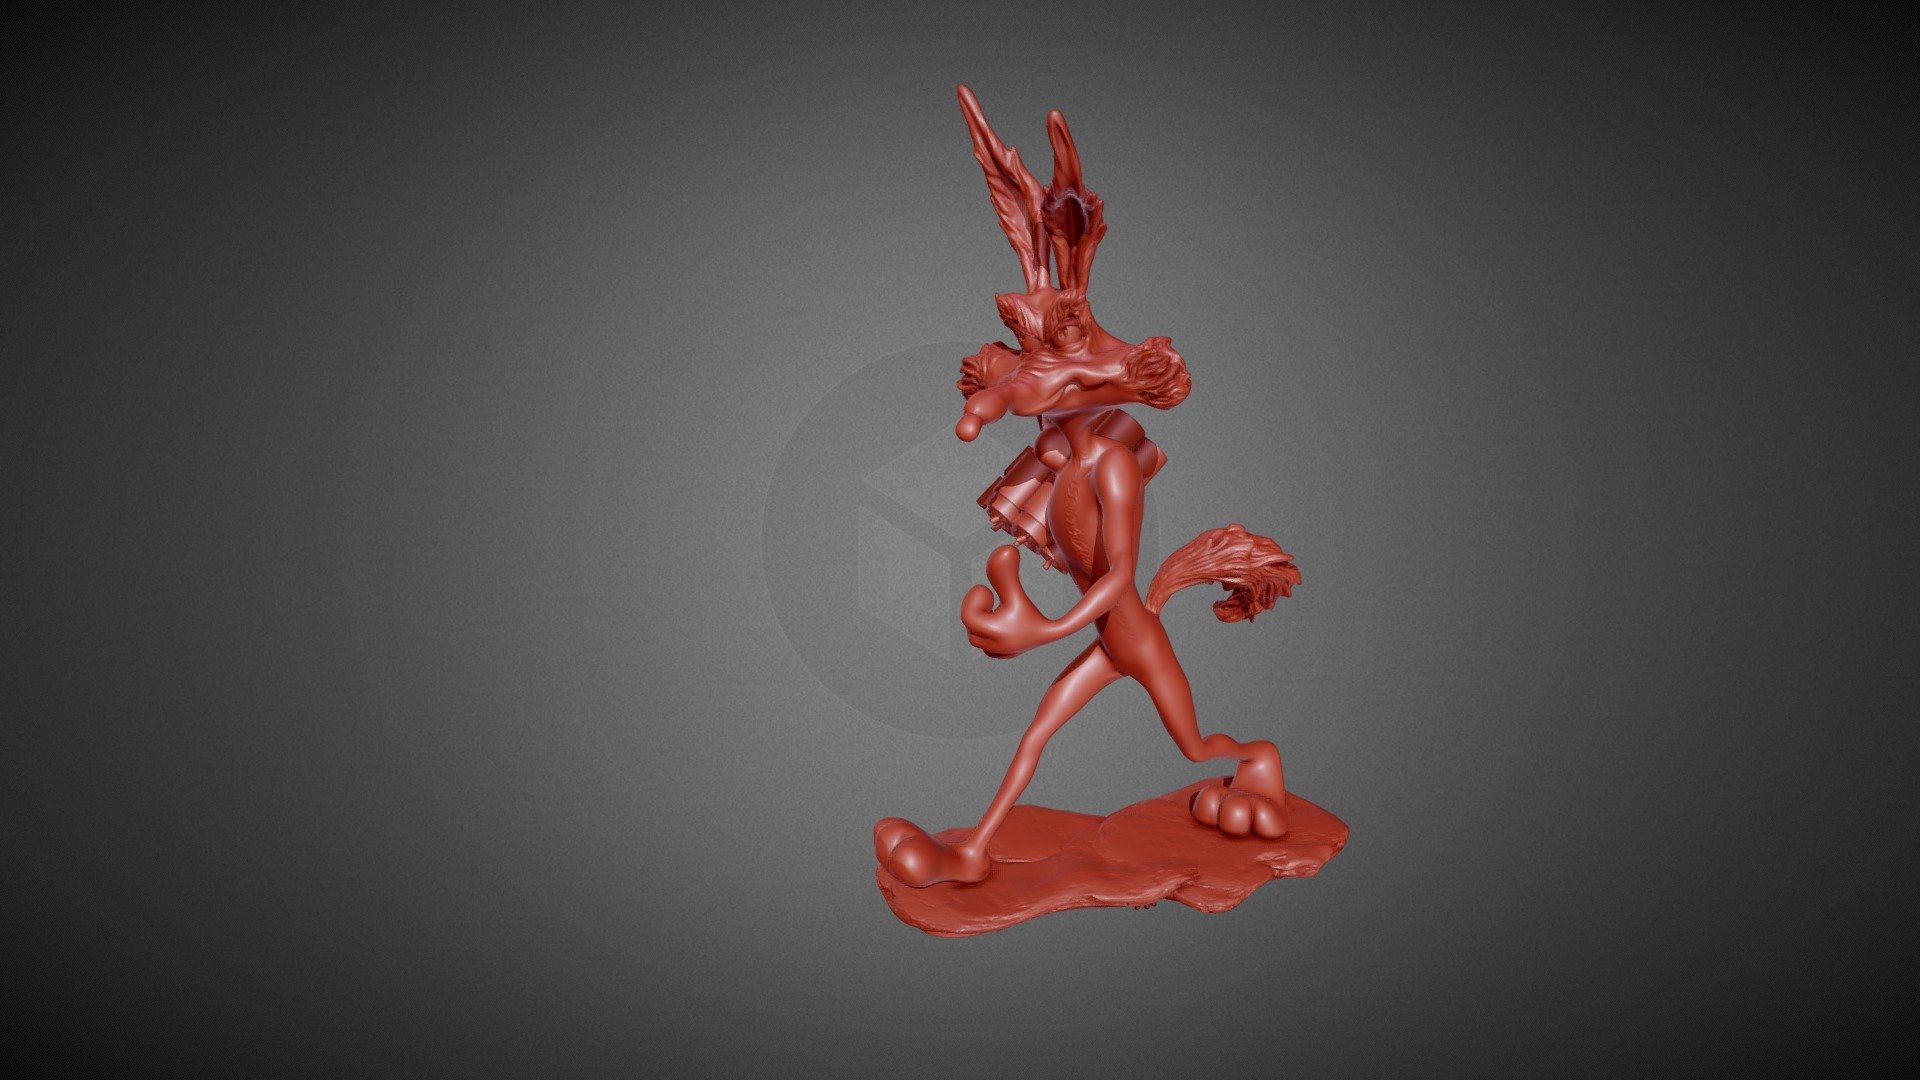 HI,I modeled in Zbrush one of my favorite cartoon character for 3d printing - Coyote Cartoon Tnt1 - 3D model by milostutus 3d model